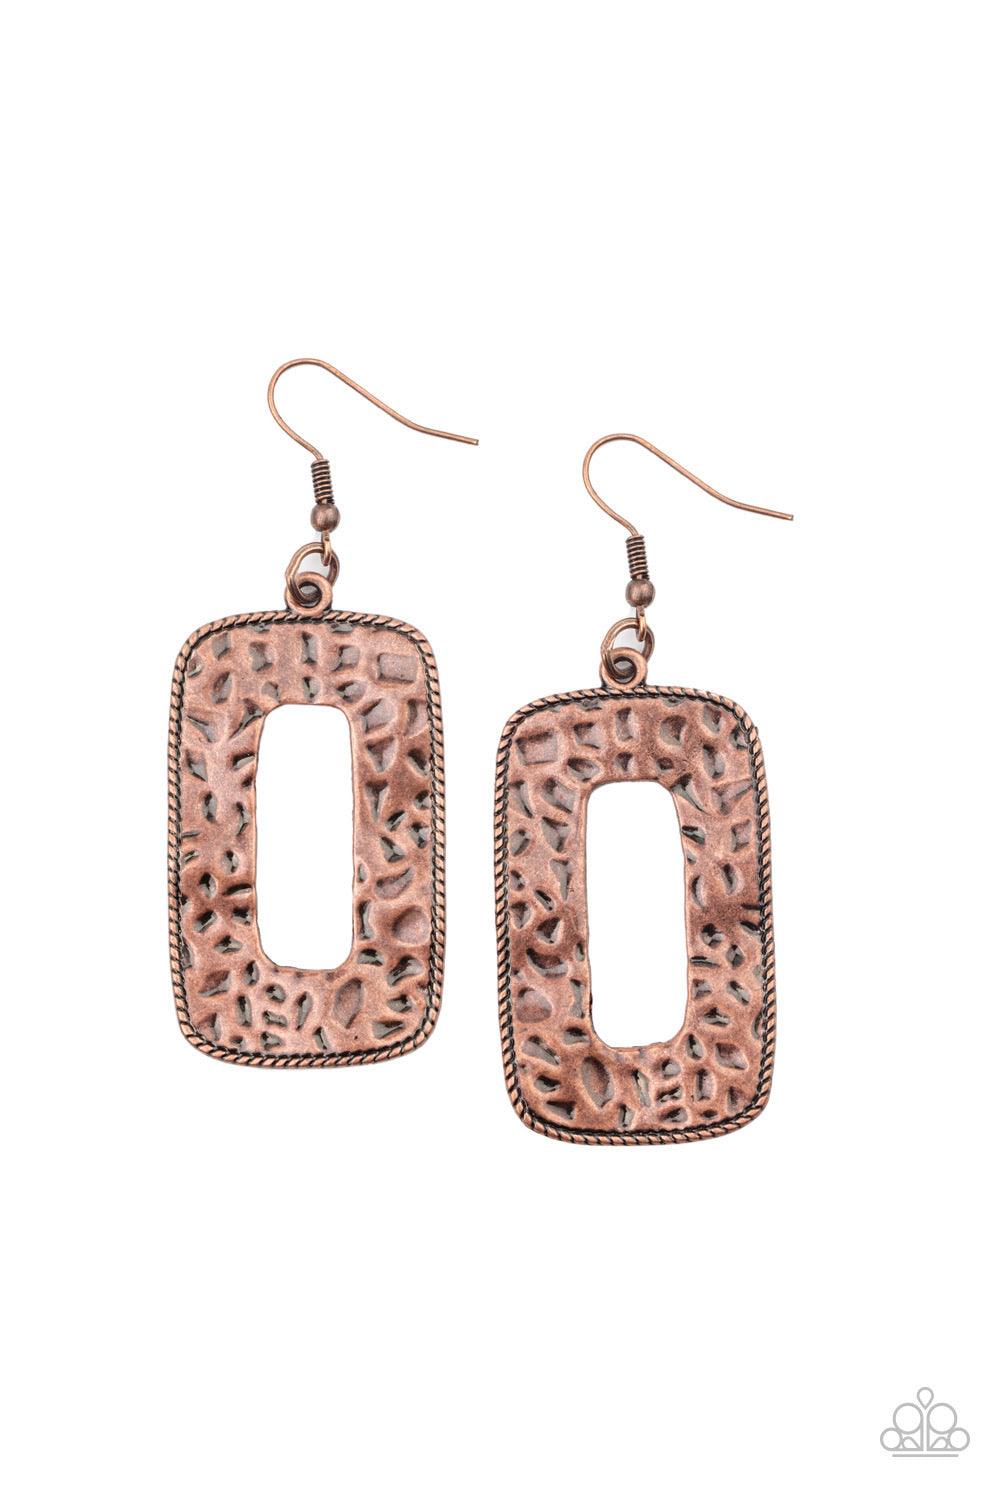 Paparazzi Accessories Primal Elements - Copper Bordered in metallic rope-like details, a copper rectangular frame has been hammered in antiqued textures for a rustically radiant look. Earring attaches to a standard fishhook fitting. Sold as one pair of ea